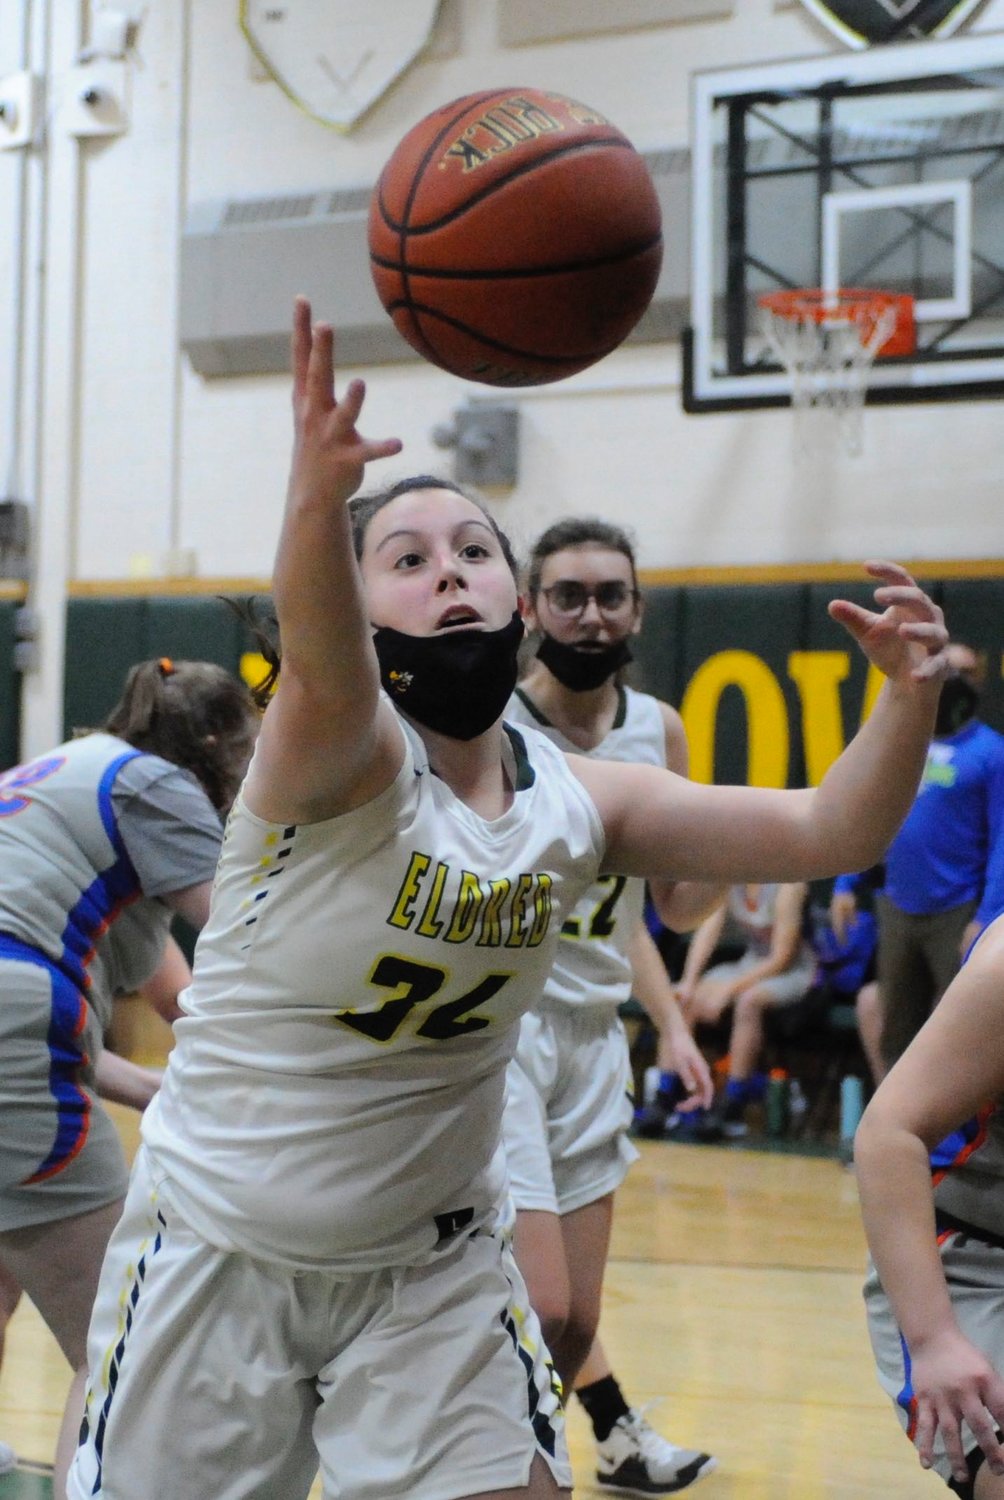 Lily Gonzalez was one of her team’s leading scorers and posted the most rebounds.